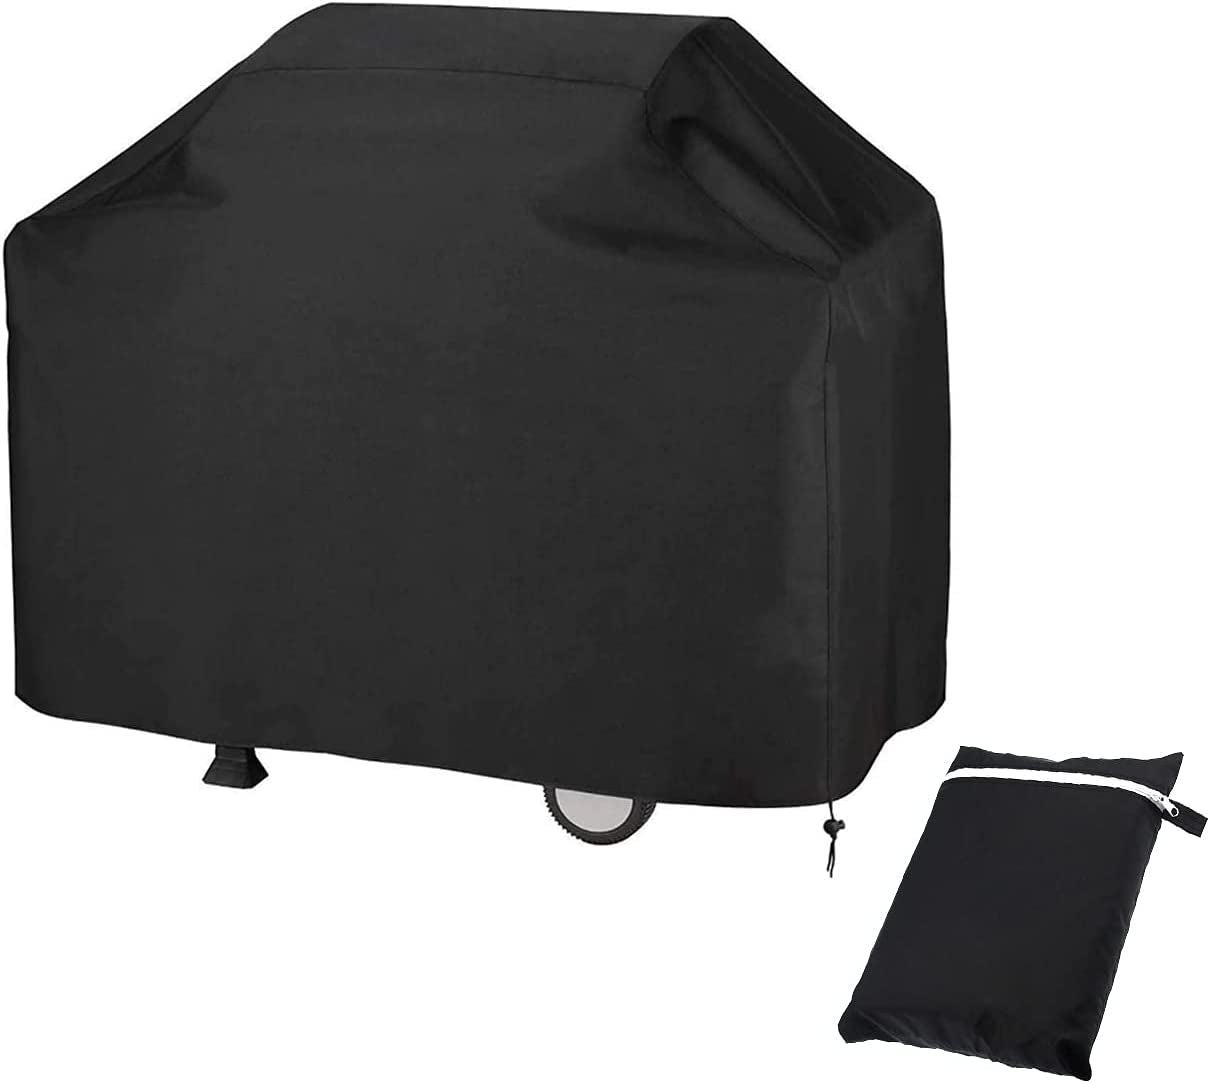 Mayhour, Mayhour 39 Inch Indoor Outdoor BBQ Cover Adjustable Grill Dedicated,Waterproof Gas Grill Cover for Weber, Char-Broil, Brinkmann,Tepro Etc, UV &Dust Resistant Oxford Durable Material (M(39"))